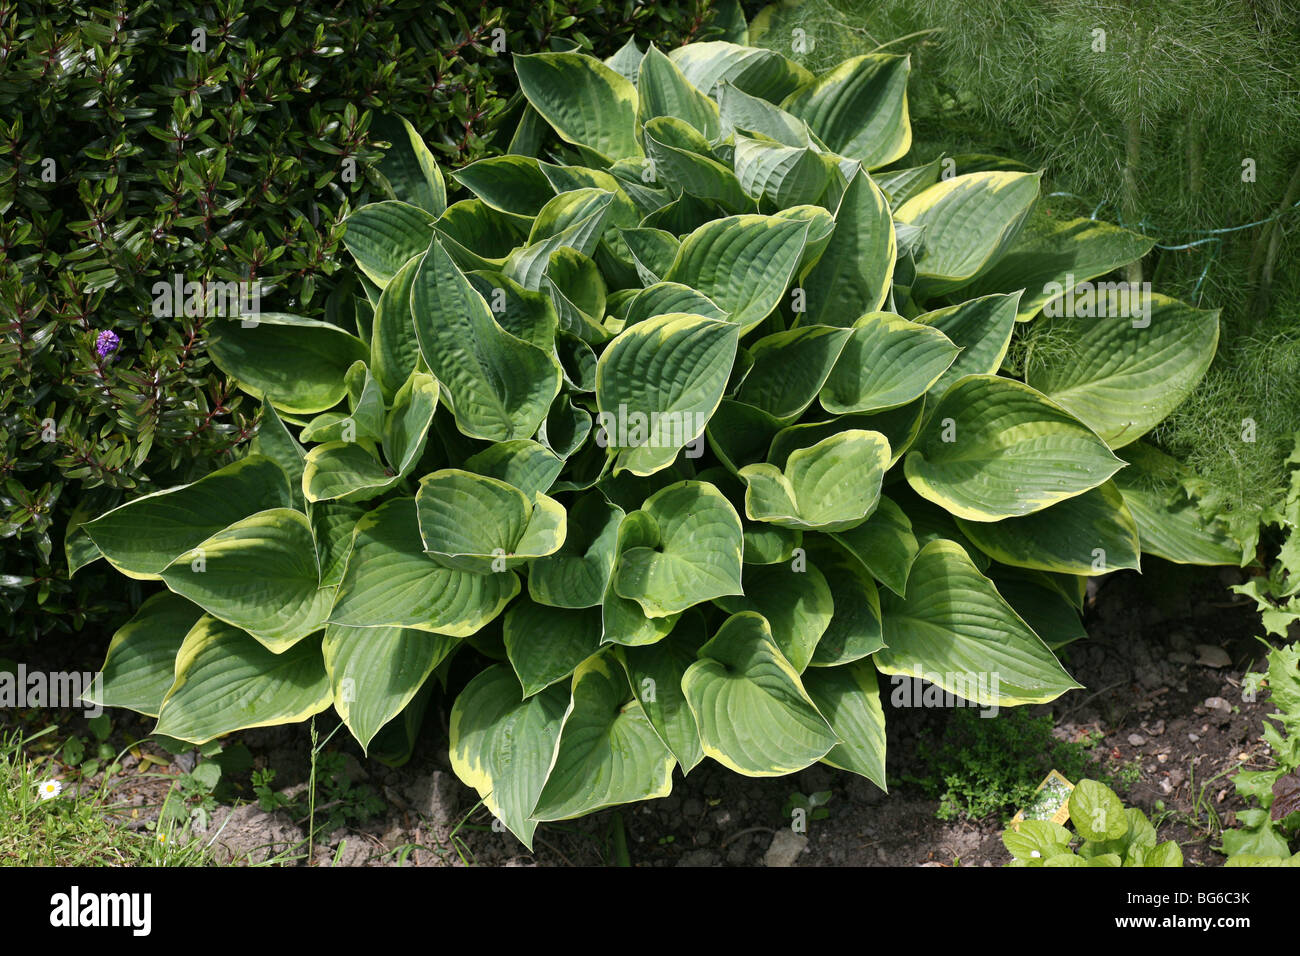 A varigated Hosta plant with green leaves and yellow edges Stock Photo ...